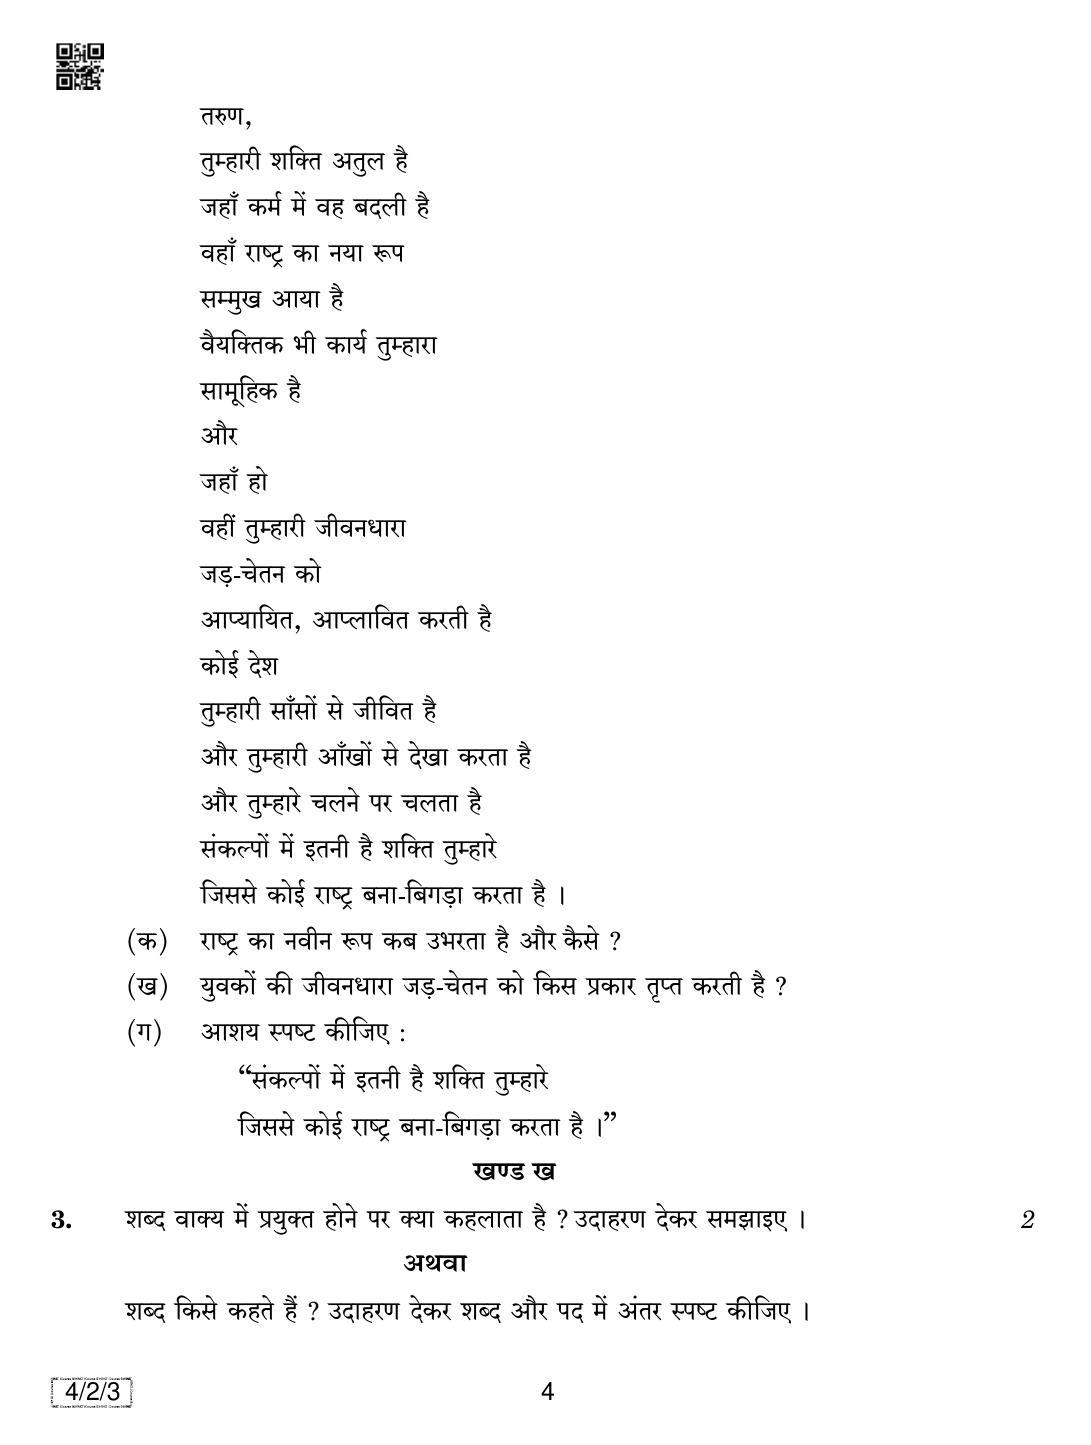 CBSE Class 10 4-2-3 HINDI COURSE- B 2019 Question Paper - Page 4